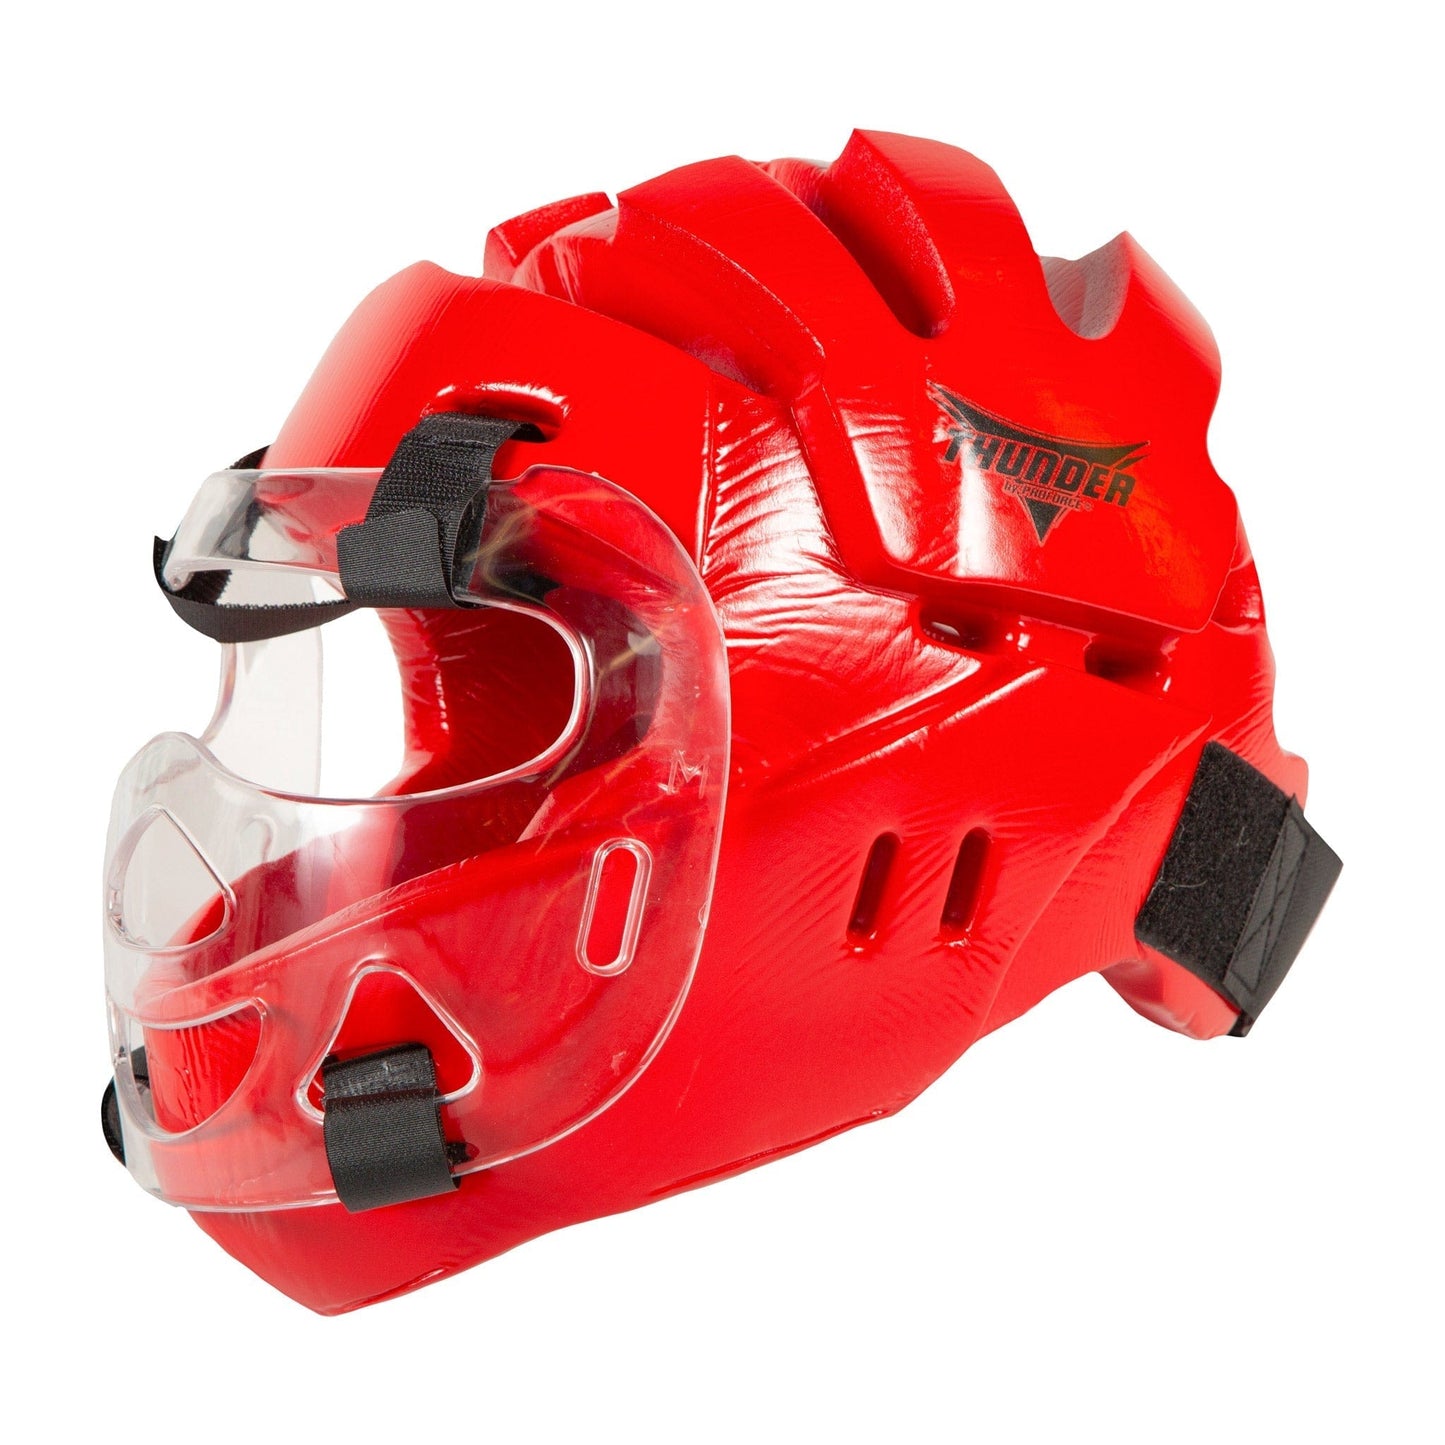 ProForce Sparring Gear ProForce Lighting 5 Piece Sparring Gear Combo Set RED with Full head and face mask